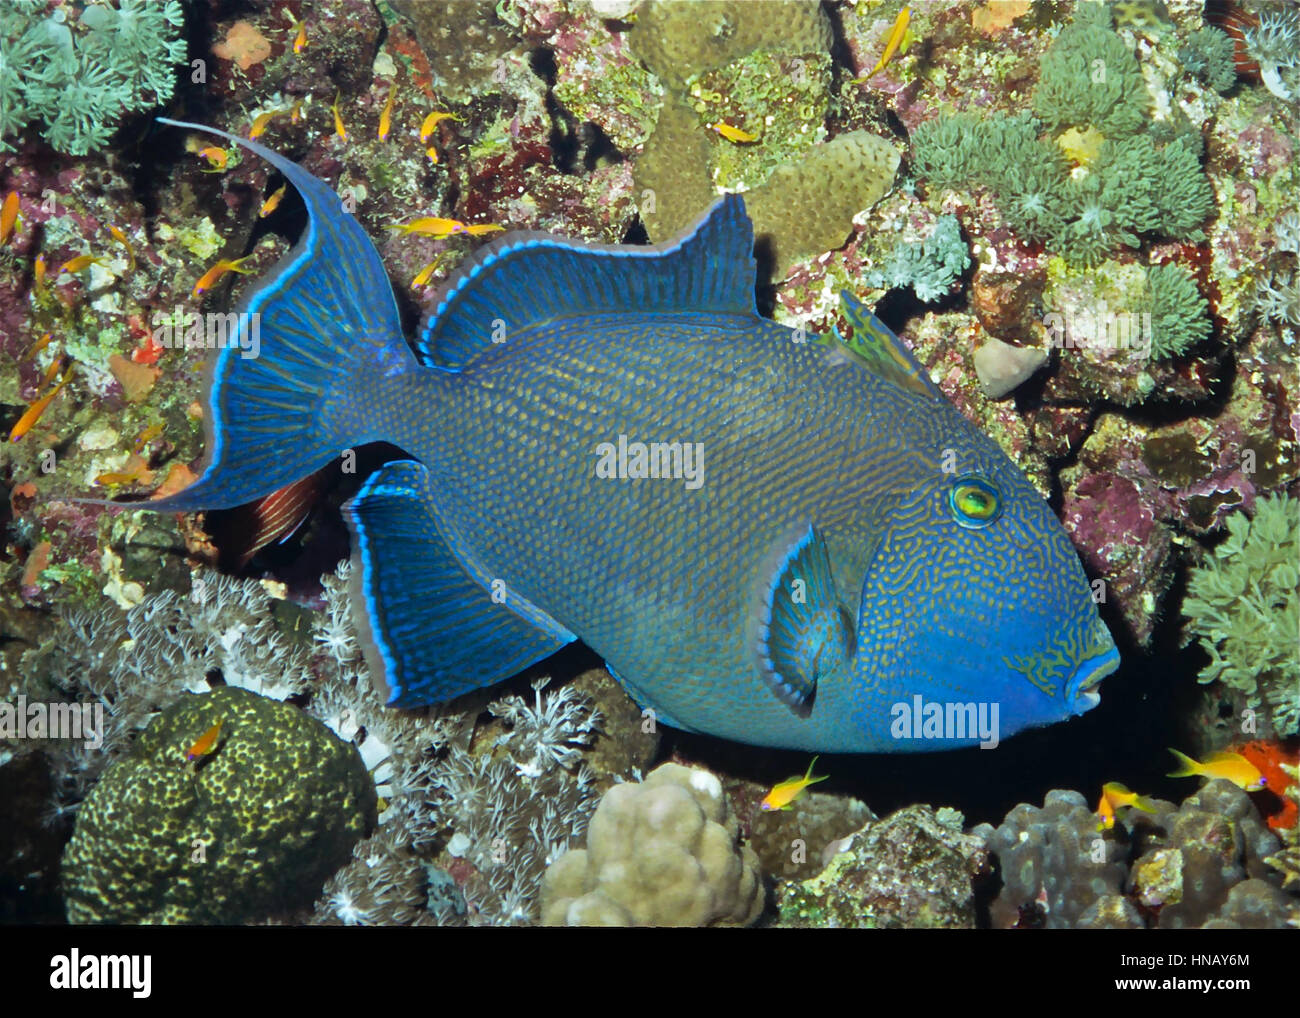 A blue triggerfish (Pseudobalistes fuscus). They are wary of divers and tend to hide in reef crevices if approached. Difficult to photograph! Red Sea. Stock Photo